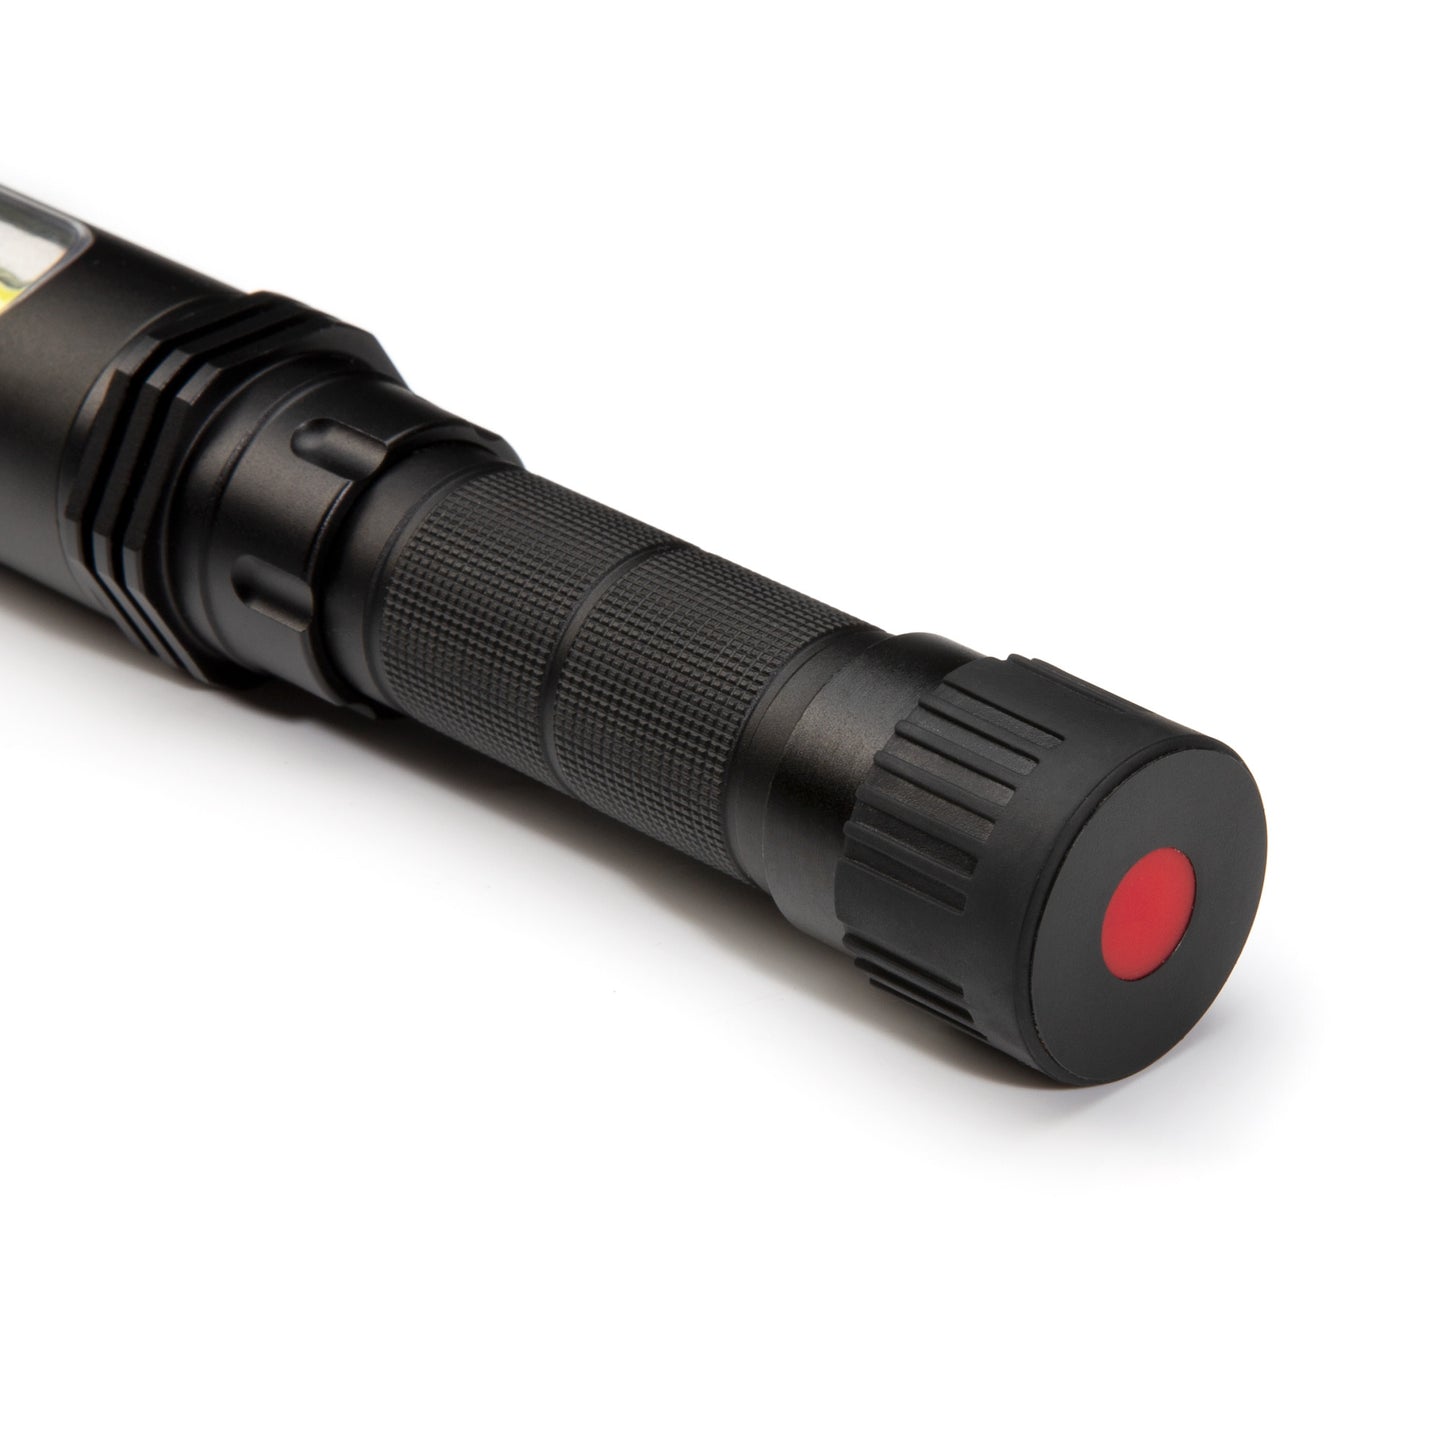 LED Rechargeable Hybrid Inspection Wand and Flashlight